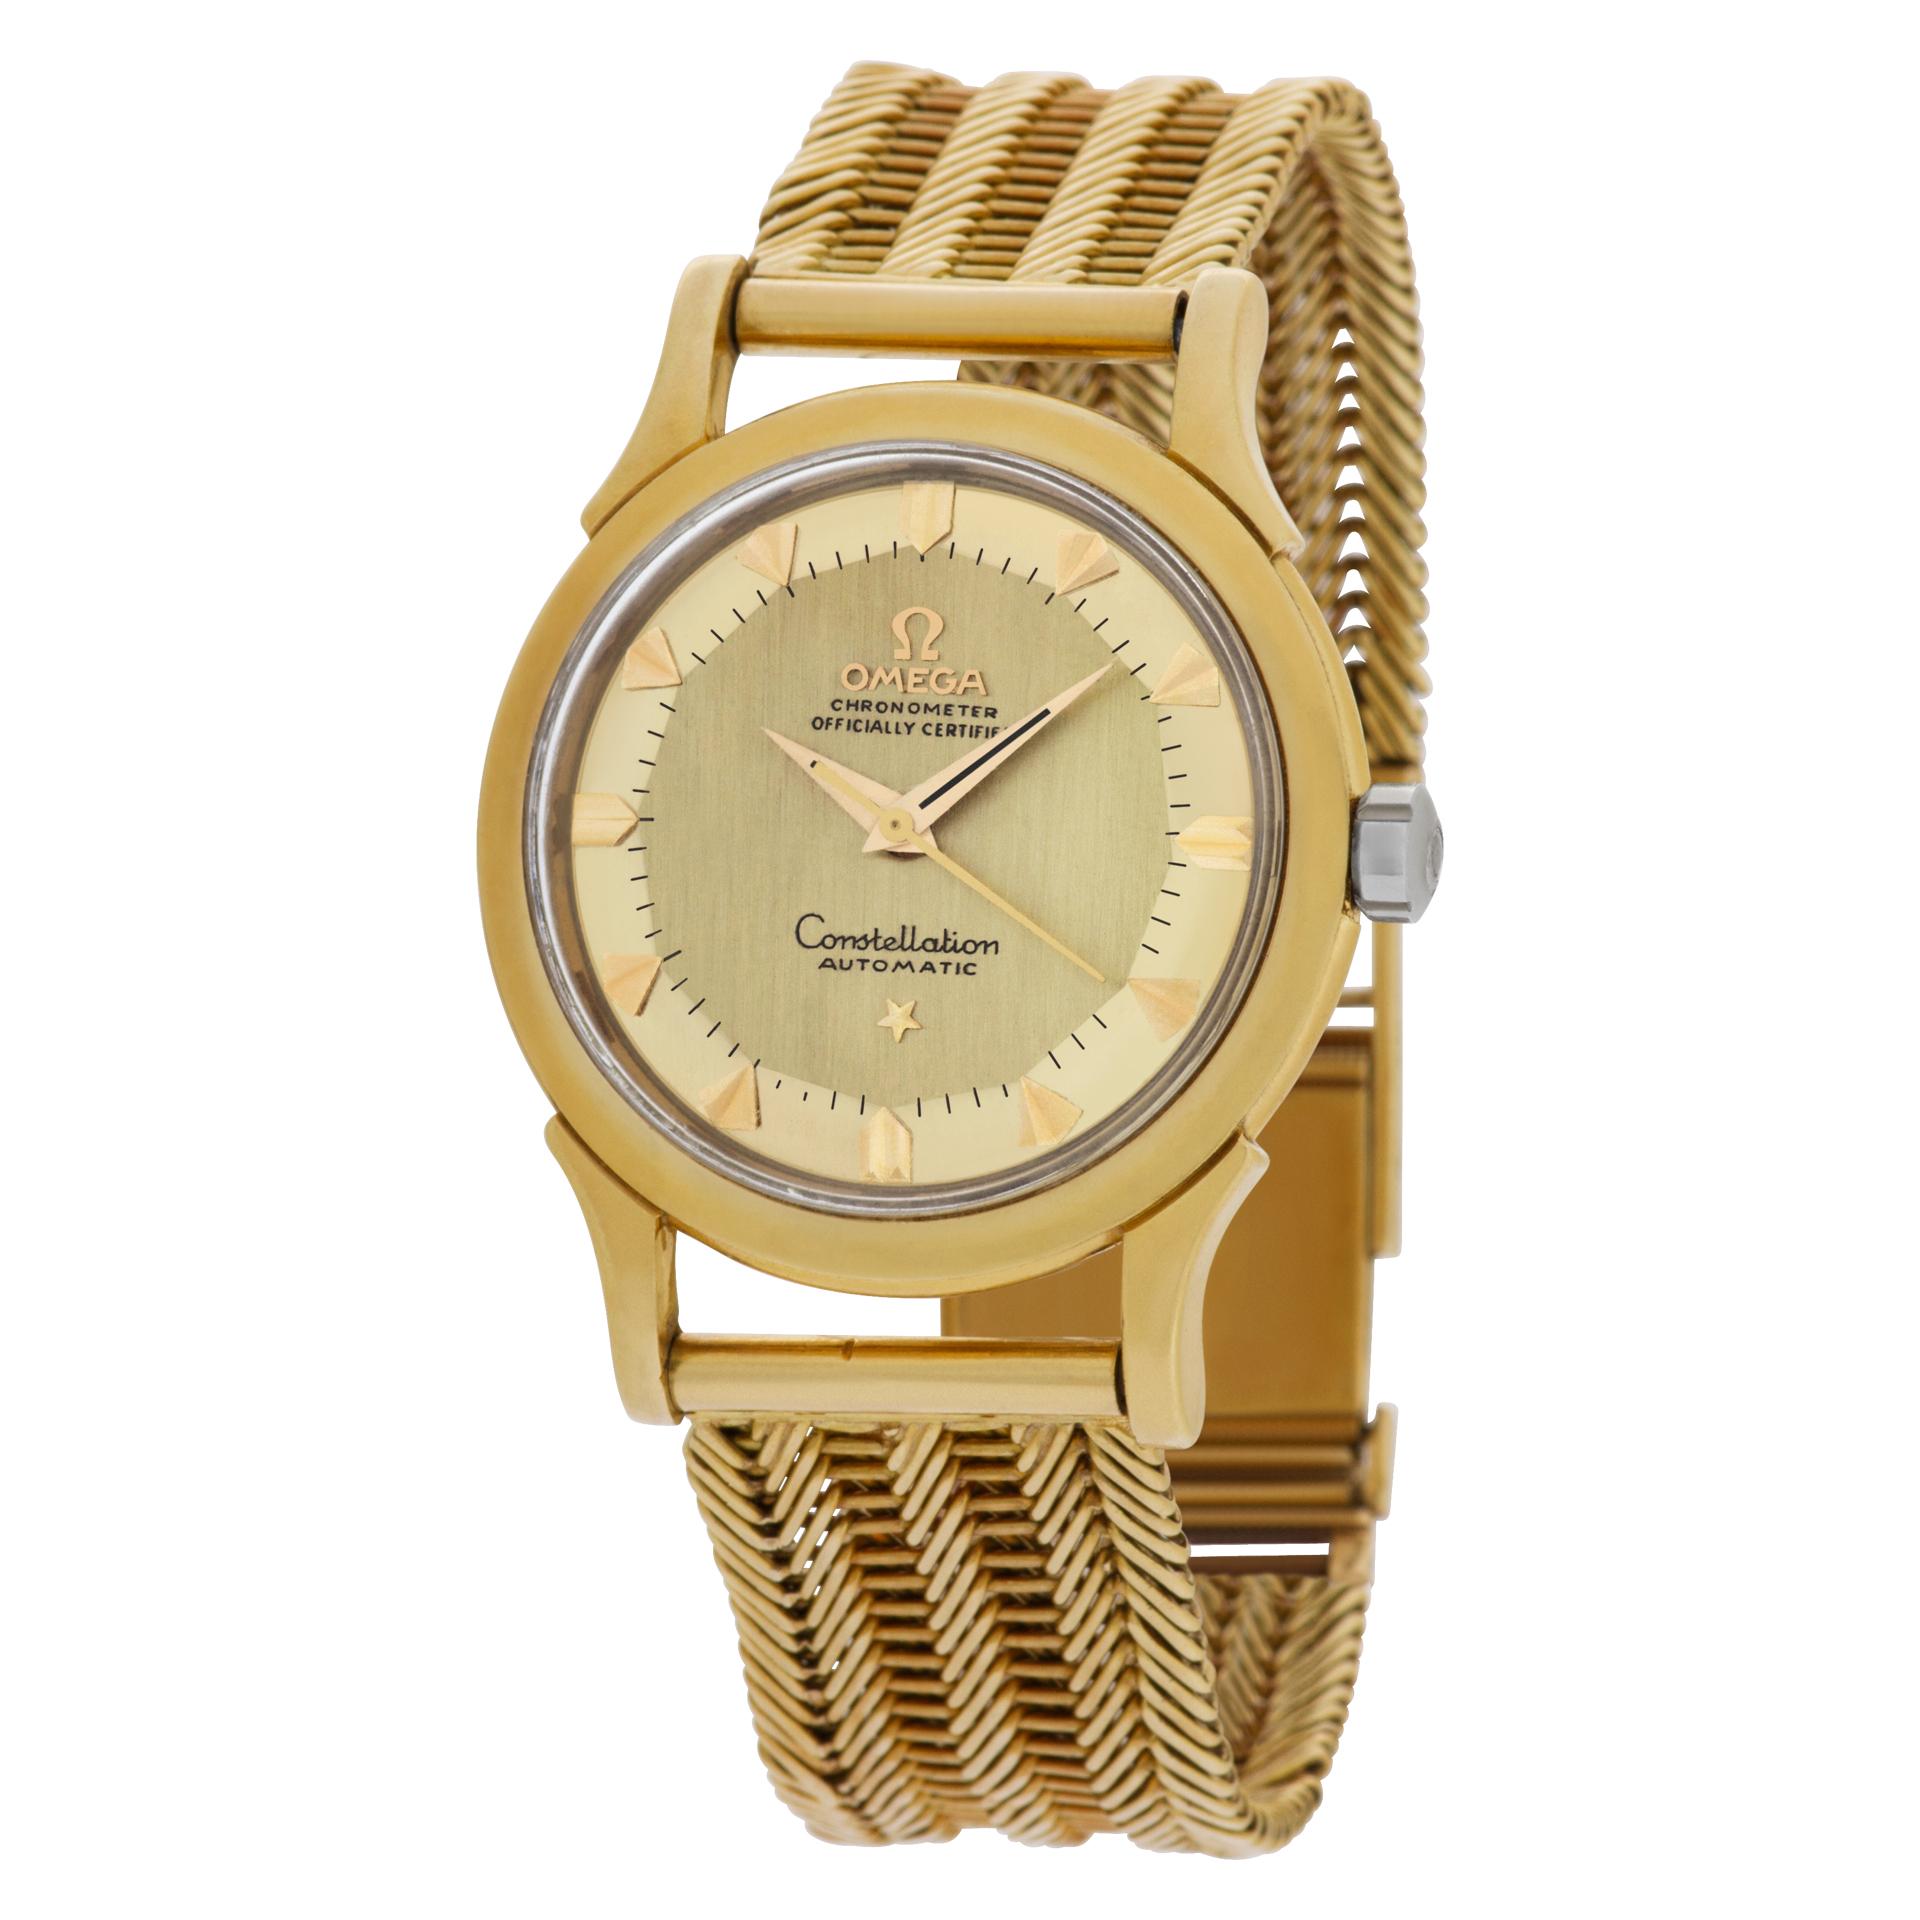 Vintage Omega Constellation in 18k with a custom 18k mesh bracelet. 24 jewel automatic movement. 35 mm case size. Fits maximum 7 inches wrist. Ref 2852/2853. Circa 1958. Fine Pre-owned Omega Watch. Certified preowned Classic Omega Constellation